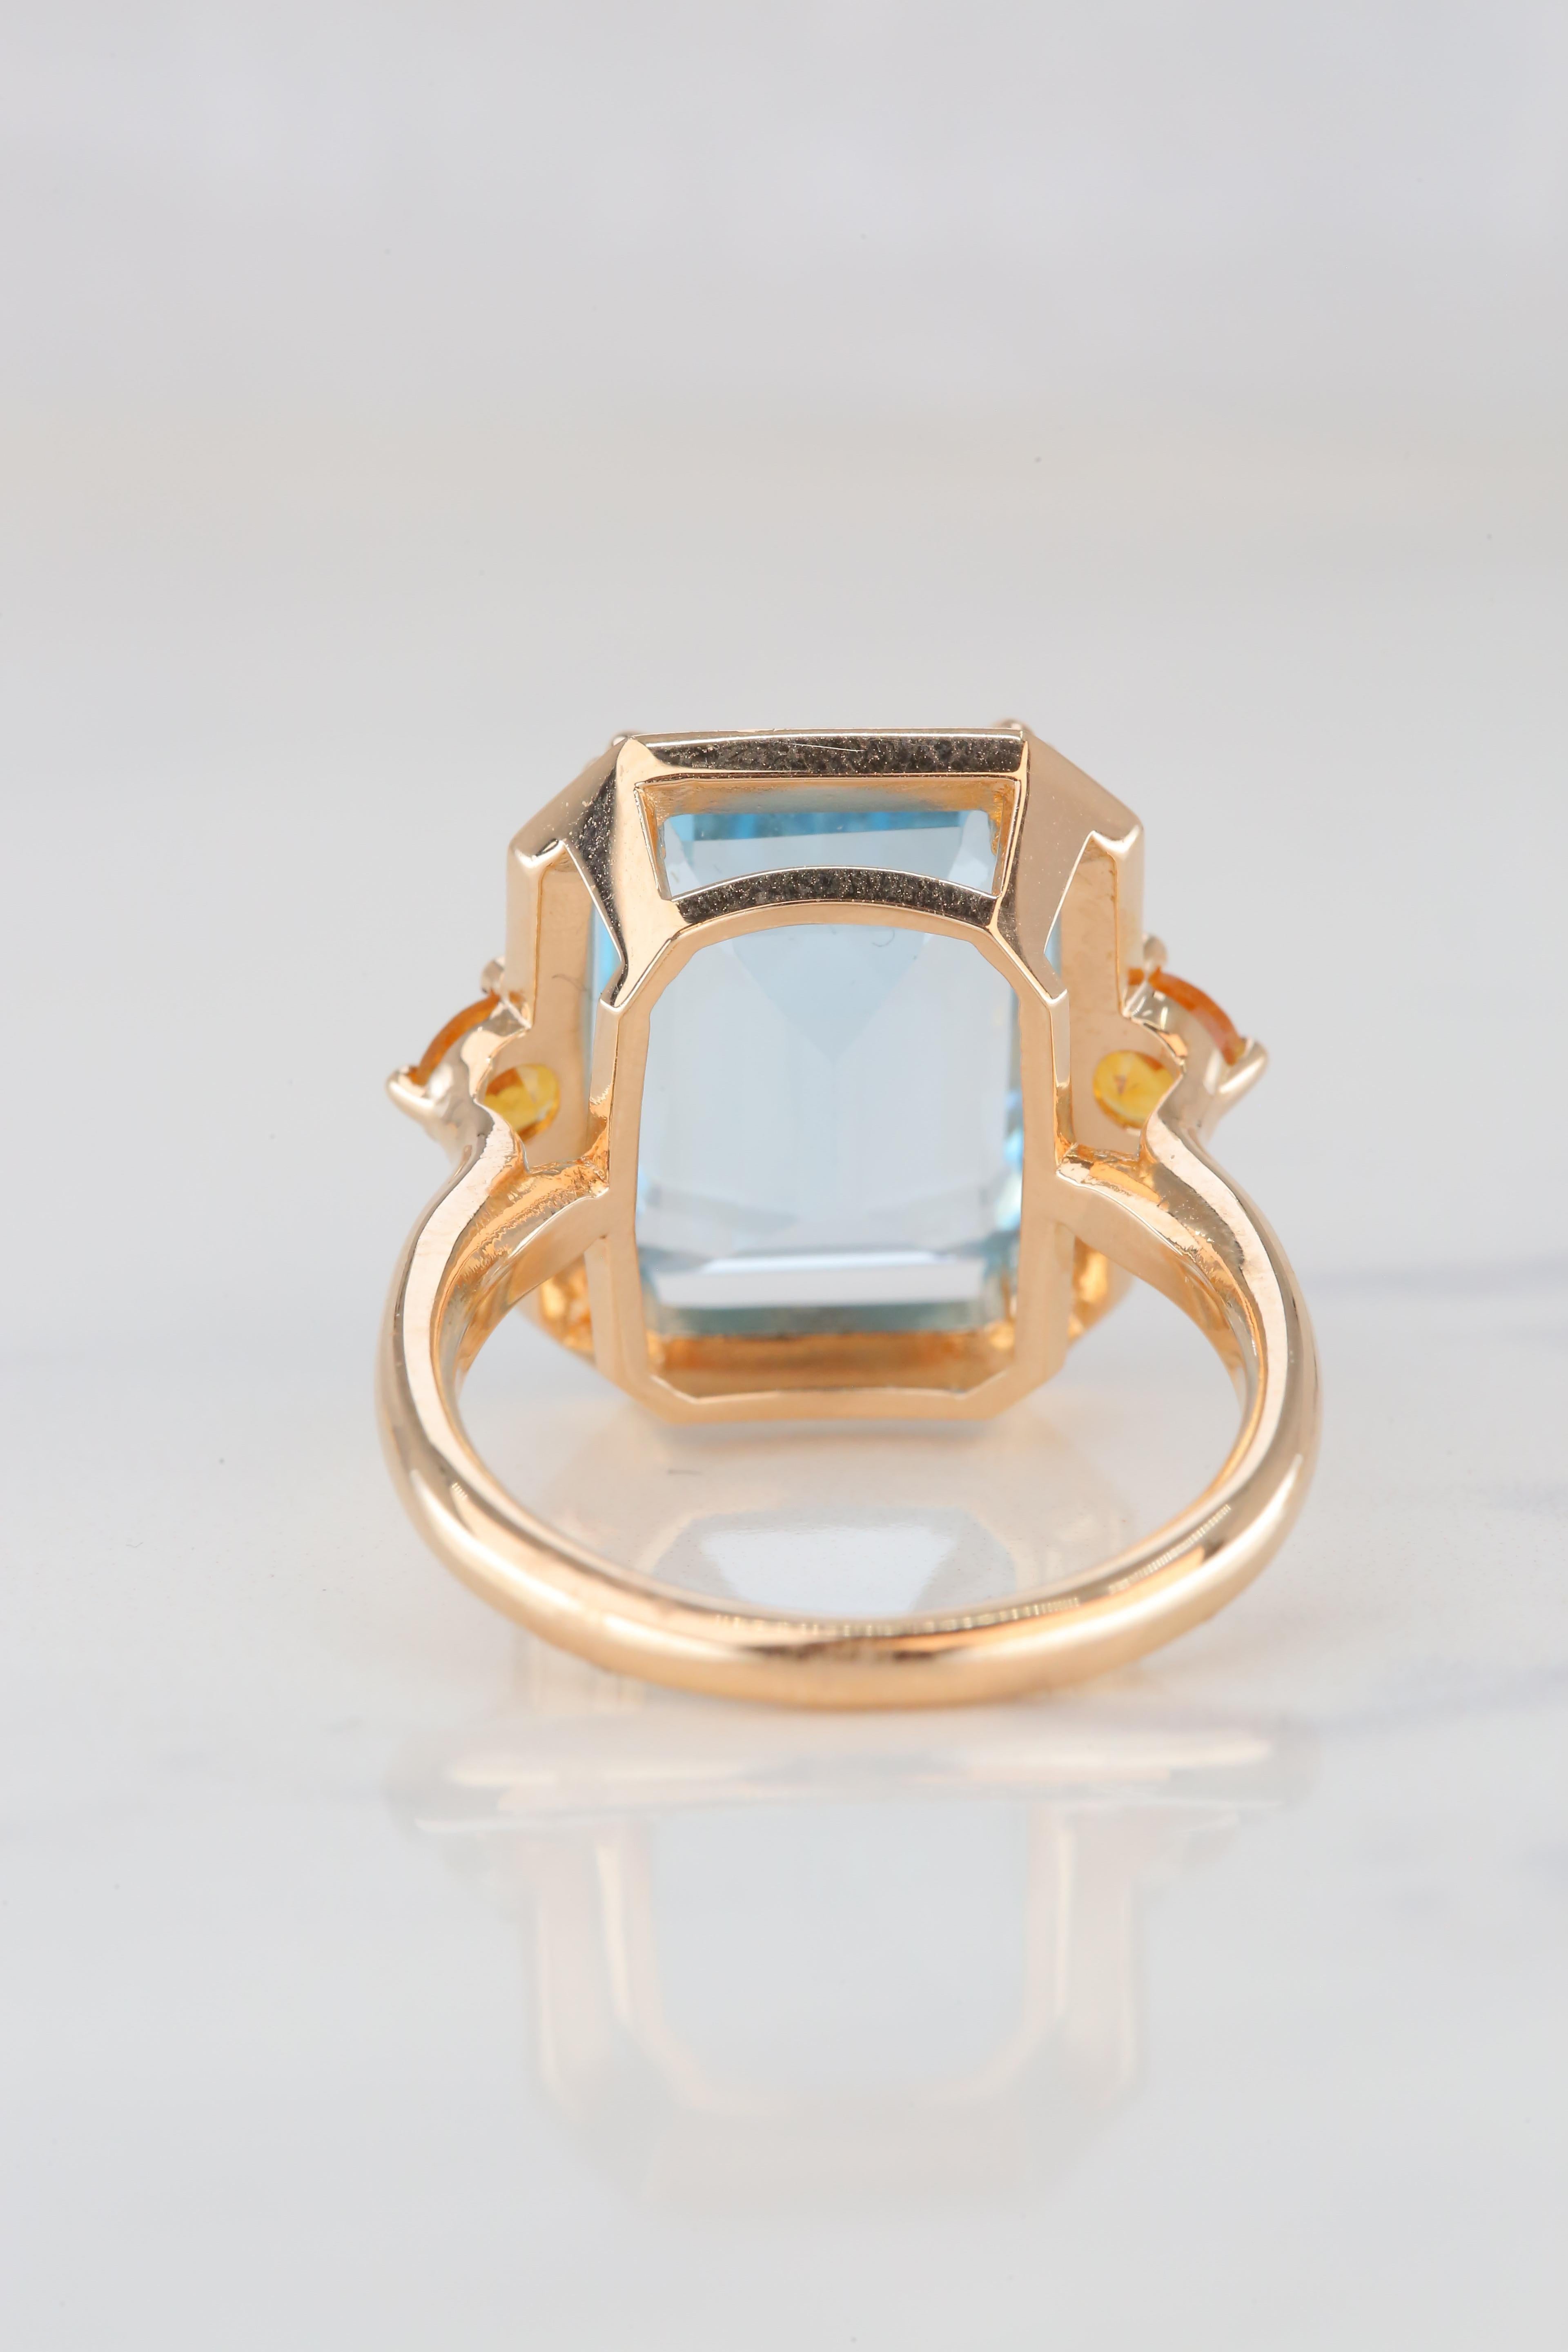 For Sale:  14K Gold Artdeco Style Enameled Cocktail Ring with 5.68 Ct Sky Topaz and Citrine 12